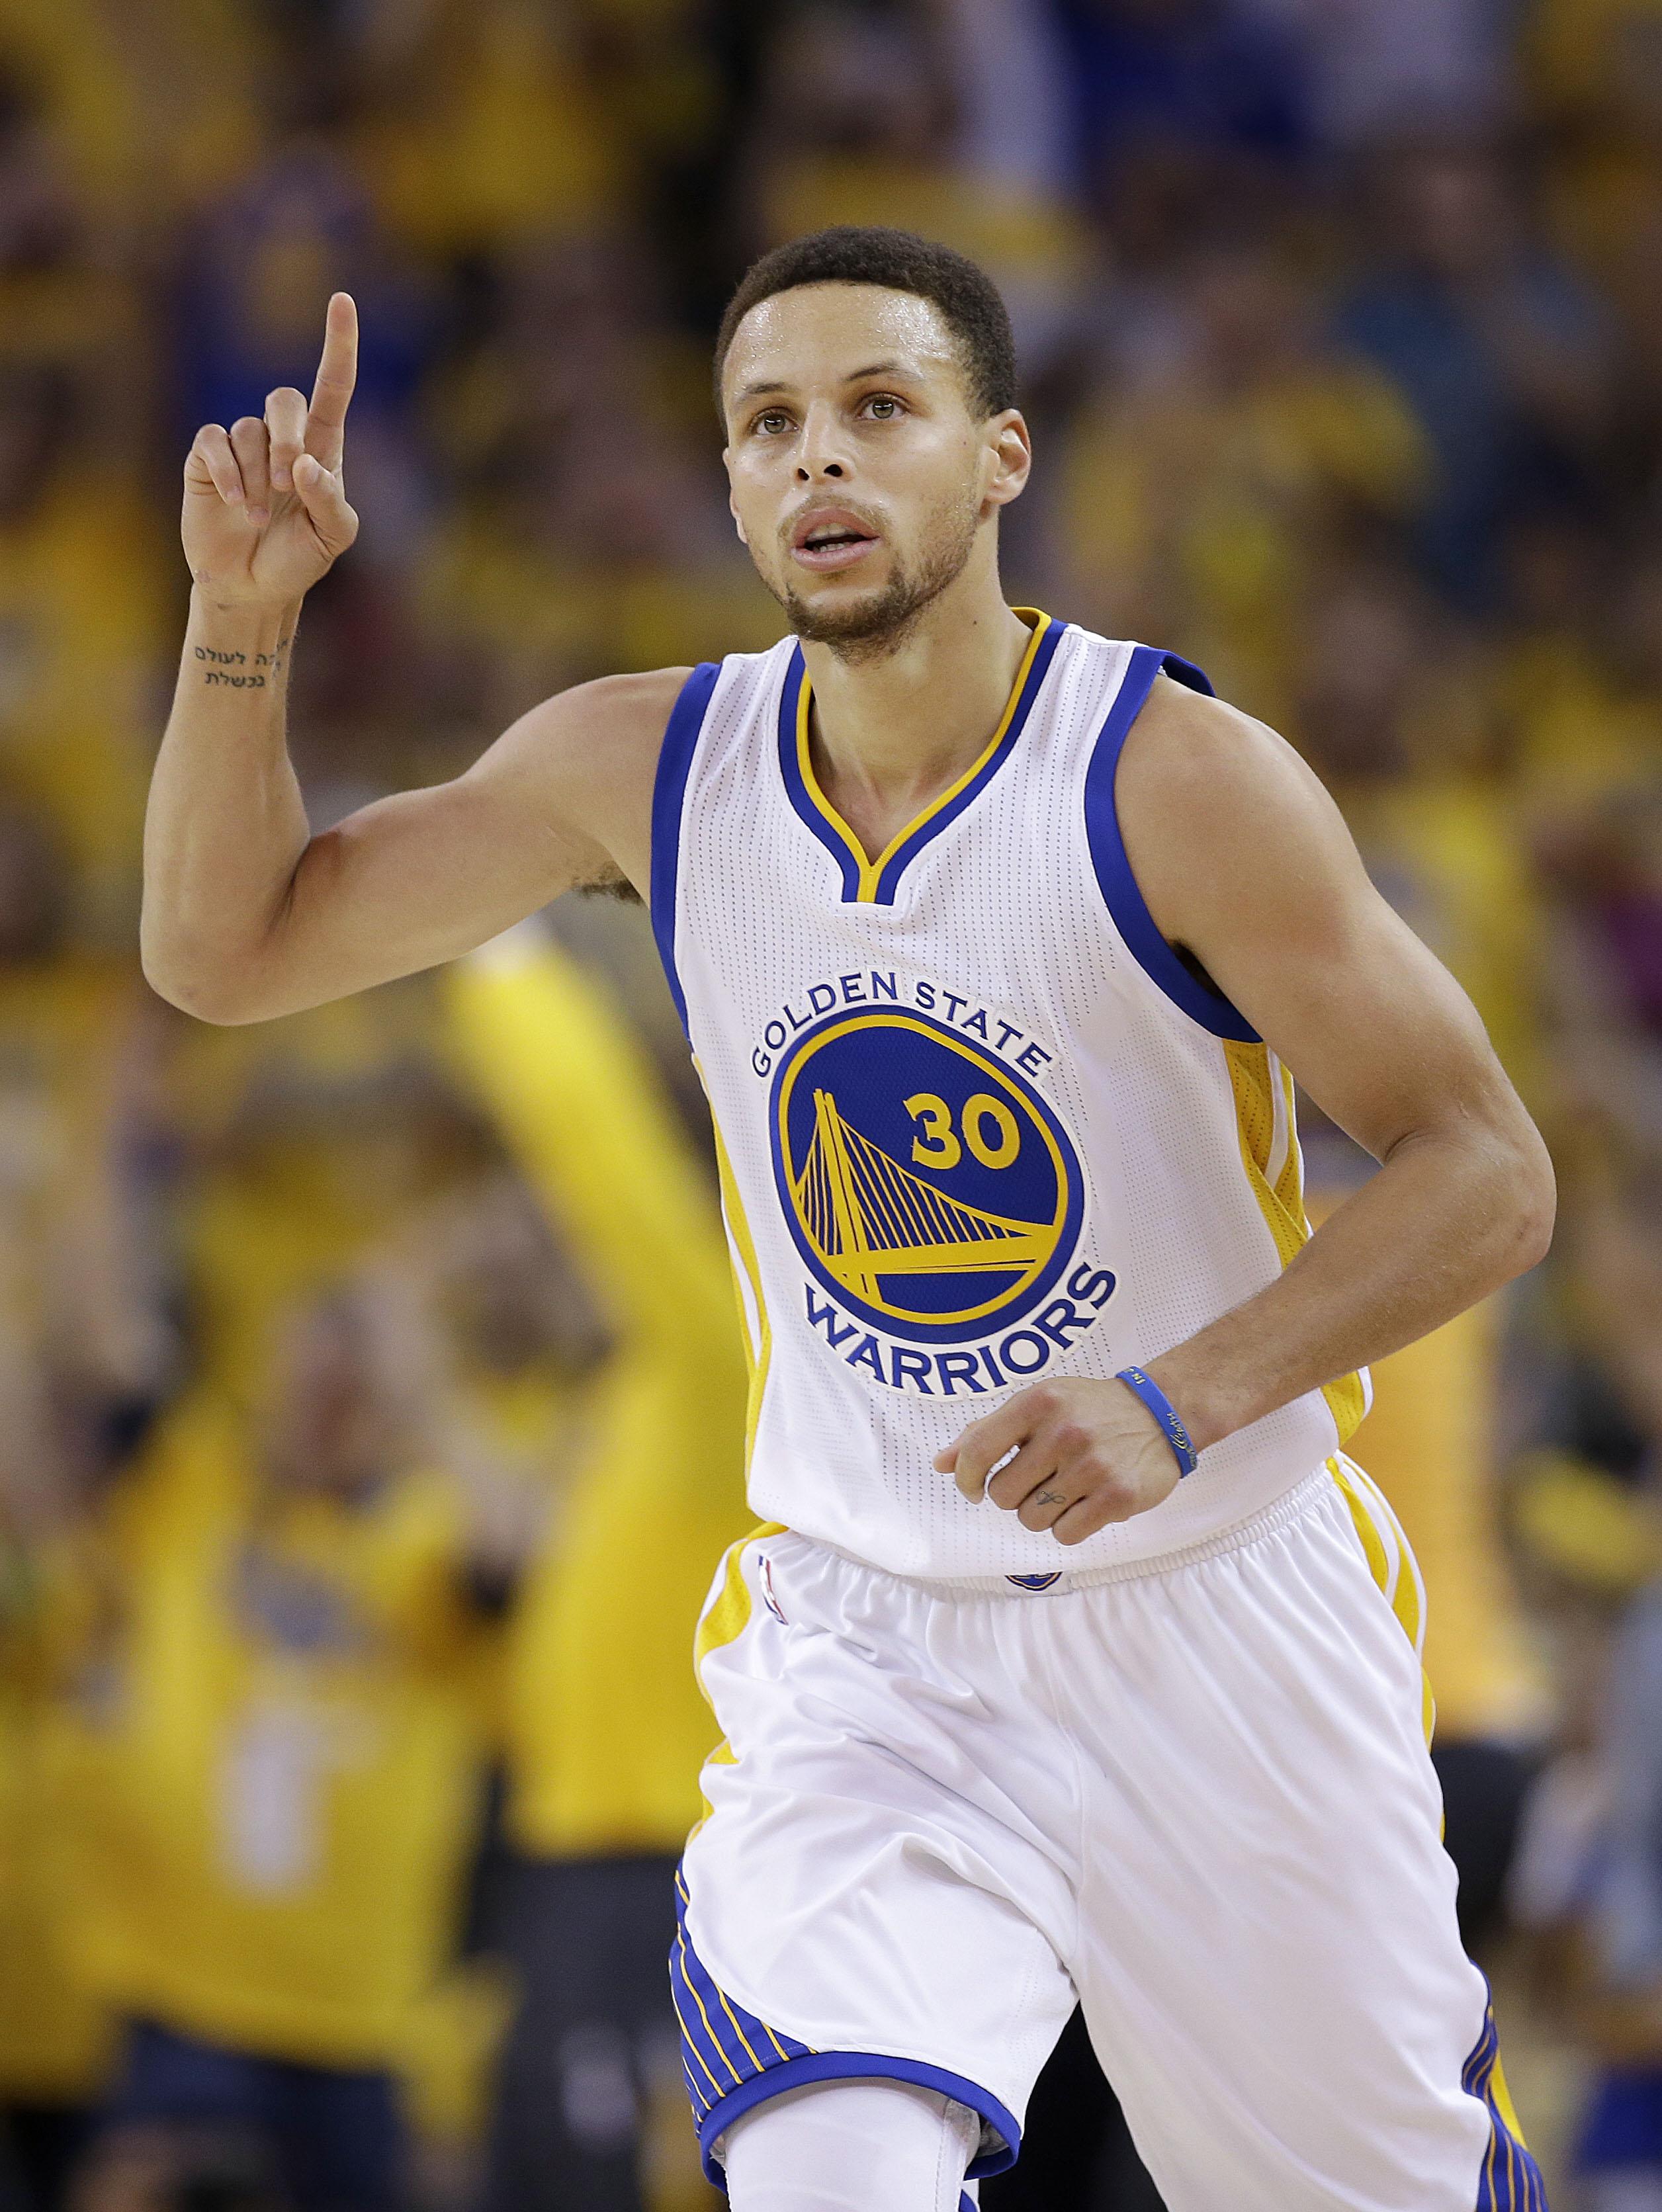 Healthy again at last, MVP Stephen Curry chases second title | The Spokesman-Review2512 x 3344